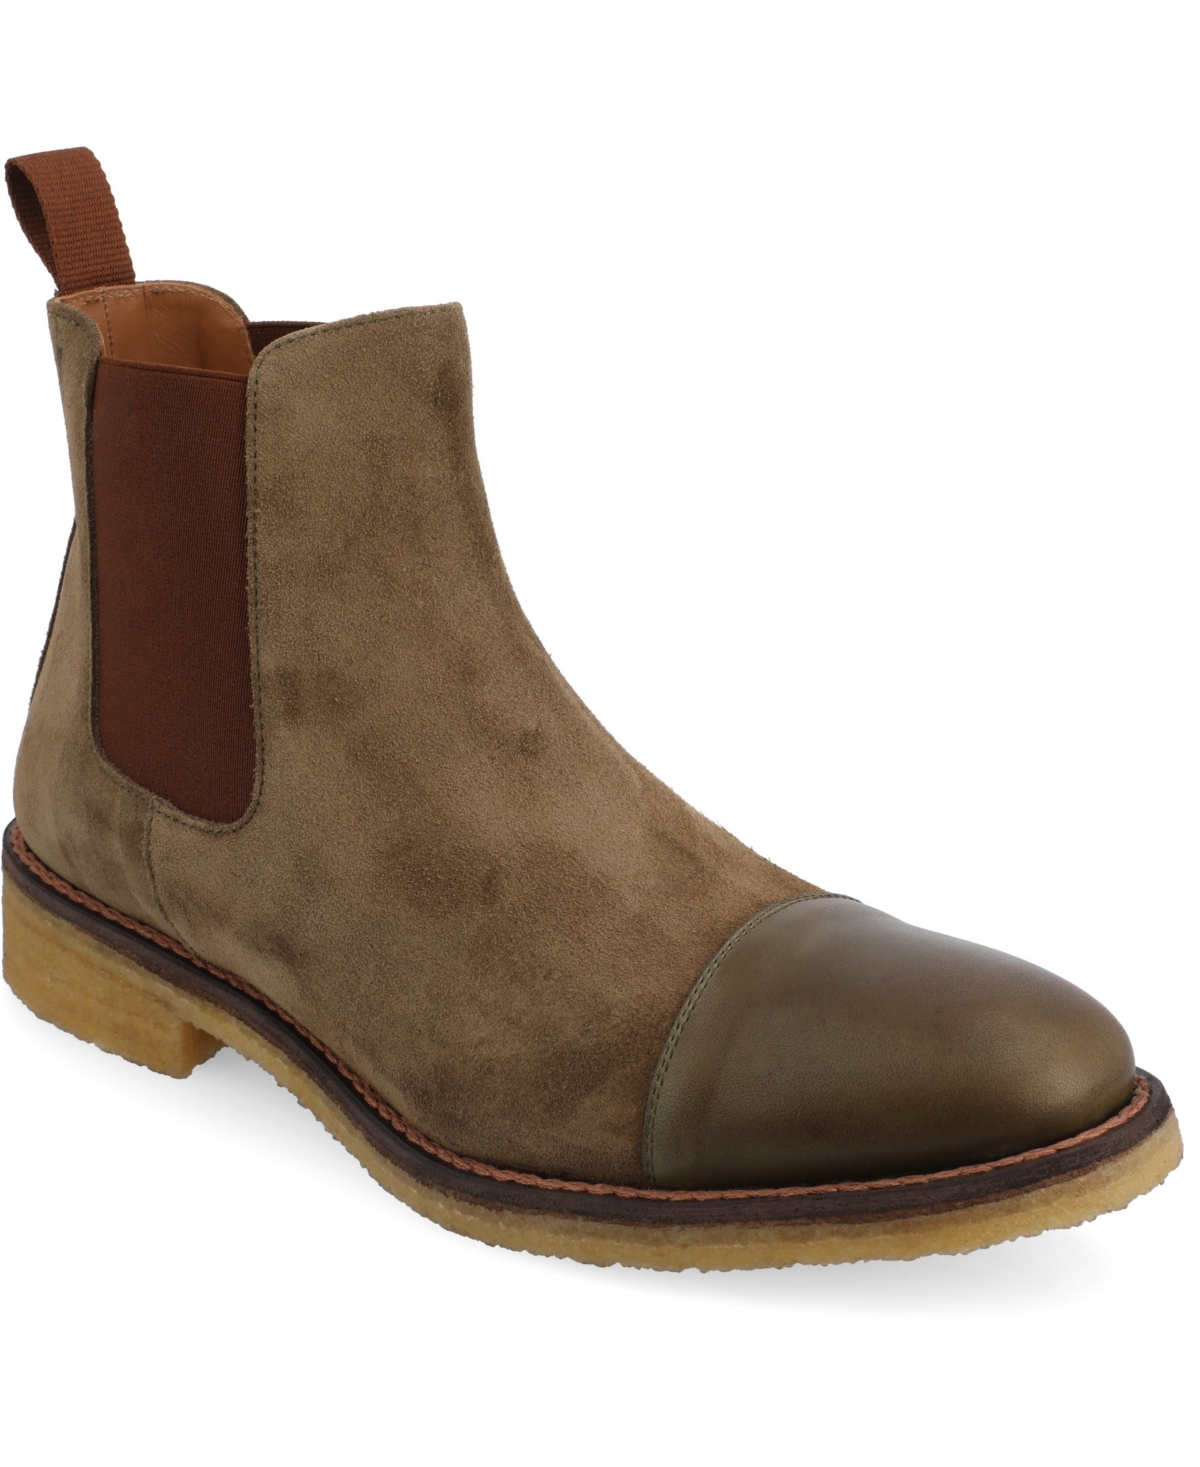 Men's The Outback Boot - Olive